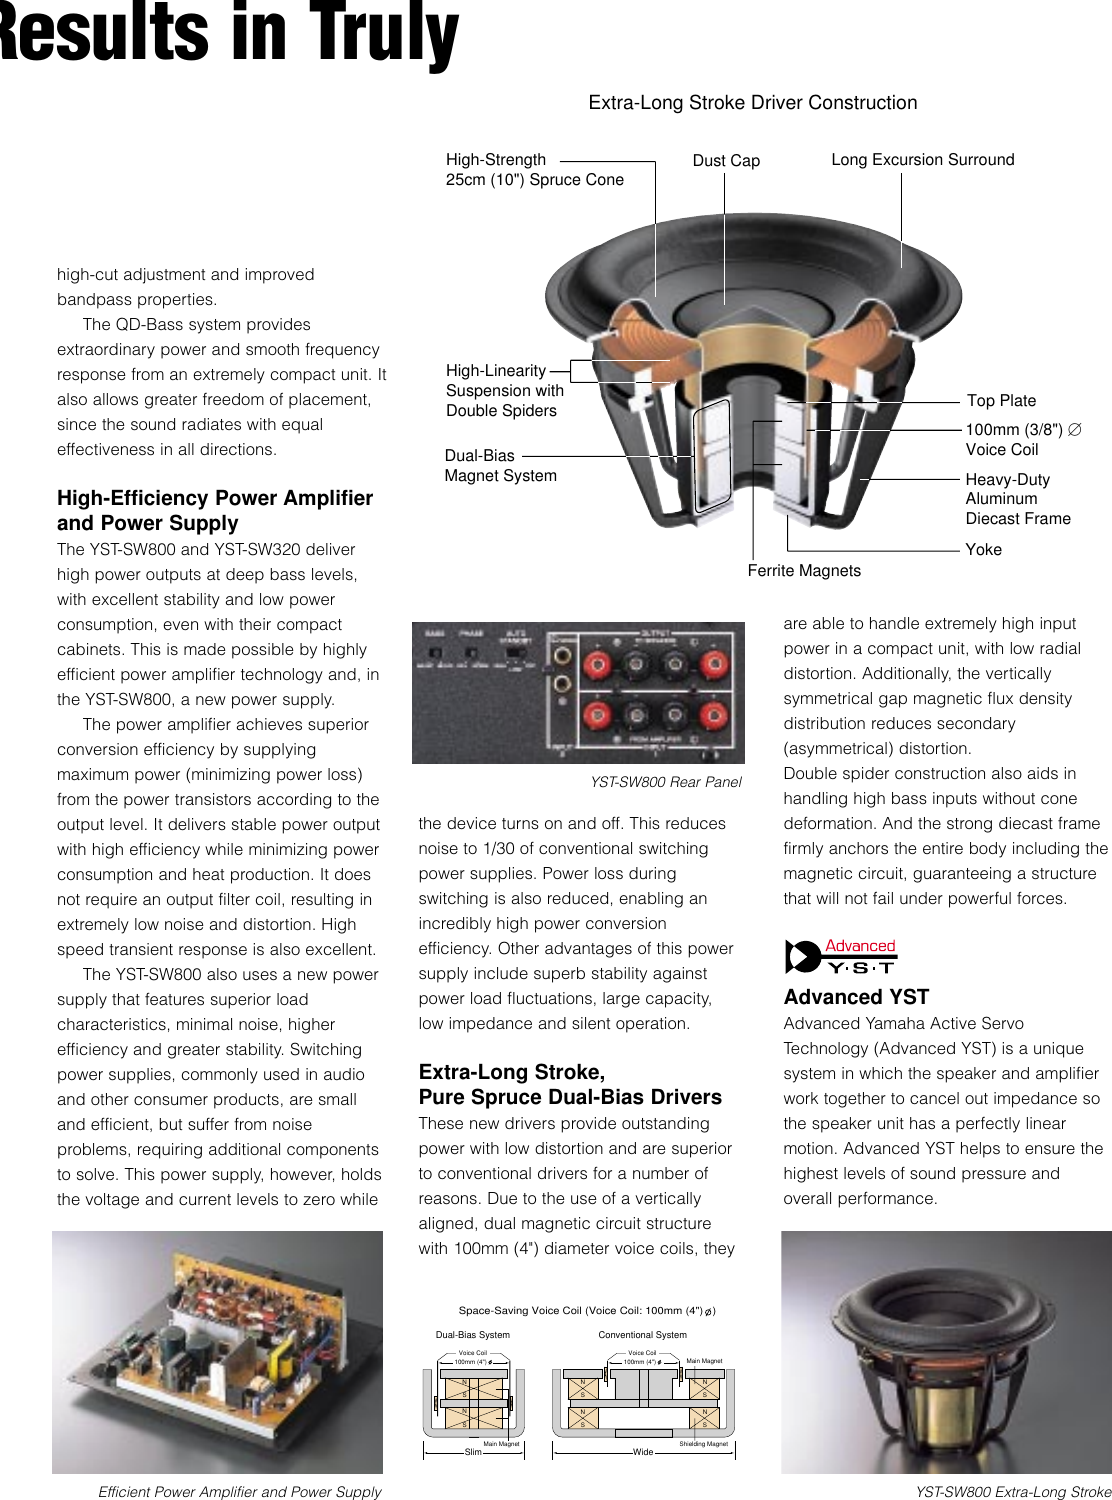 Page 5 of 8 - Yamaha Speaker-System-Advanced-Yst-And-Qd-Bass-Subwoofers-Users-Manual YST-SW800/320 Cat.(U/C)  Yamaha-speaker-system-advanced-yst-and-qd-bass-subwoofers-users-manual